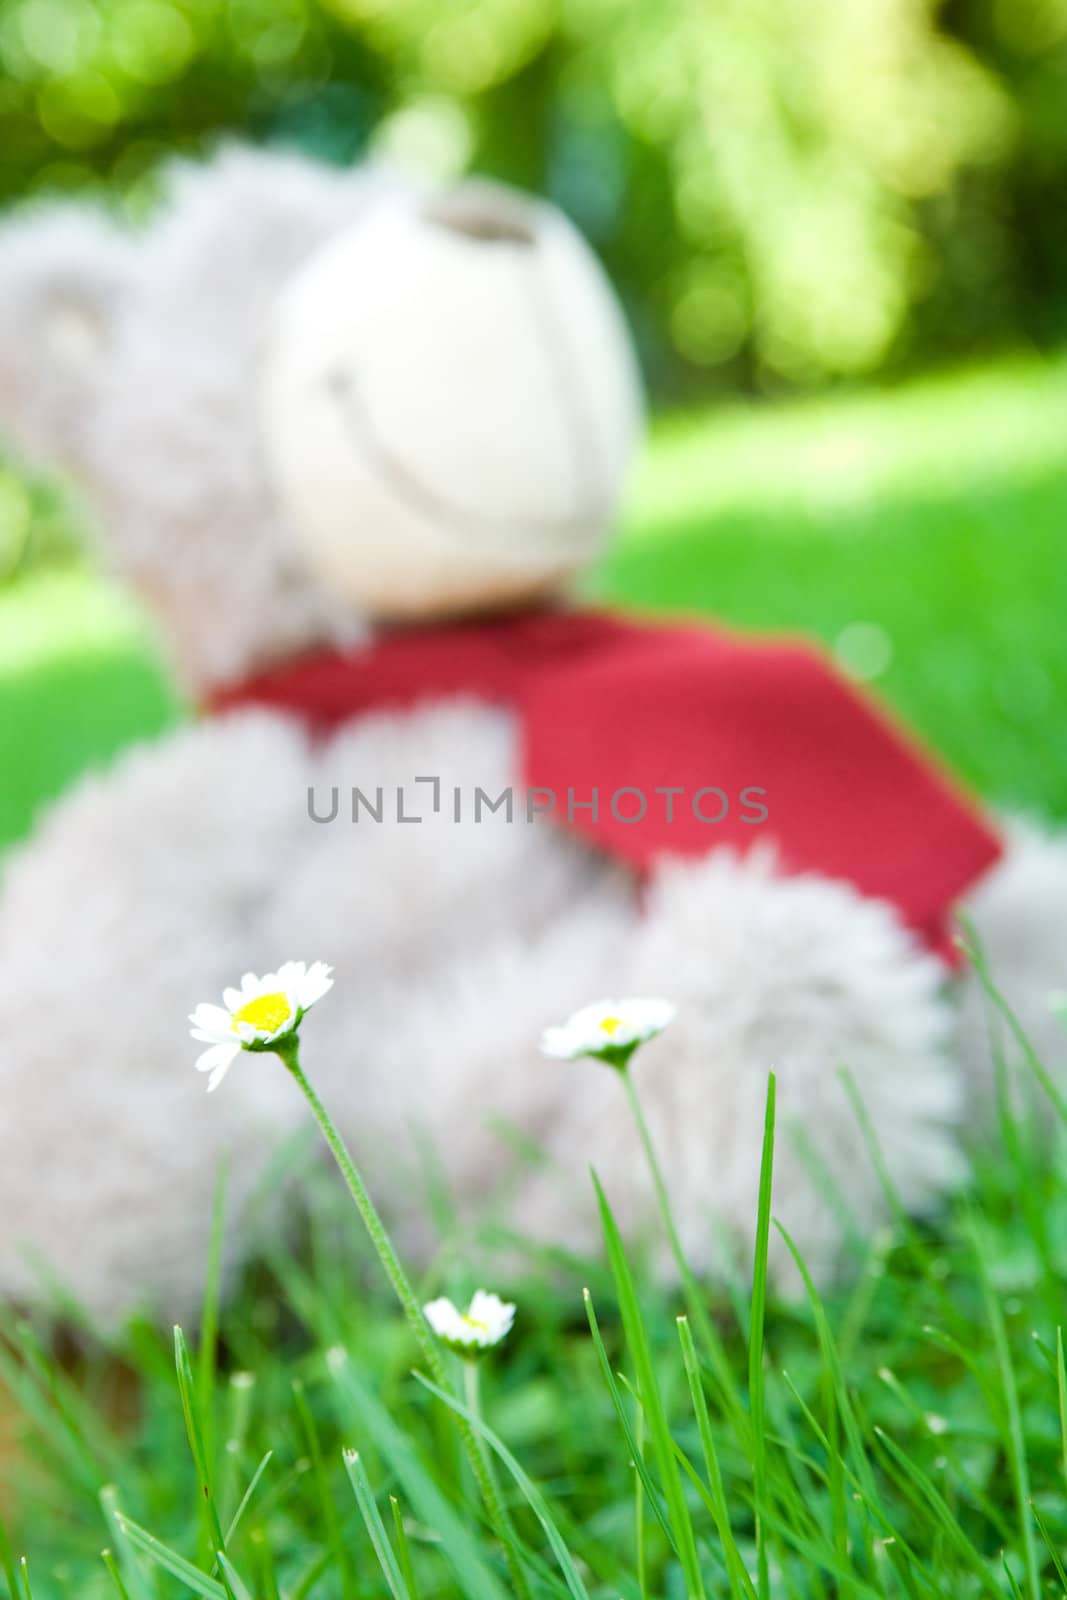 Daisies in front of a teddy bear. Shallow depth of field.